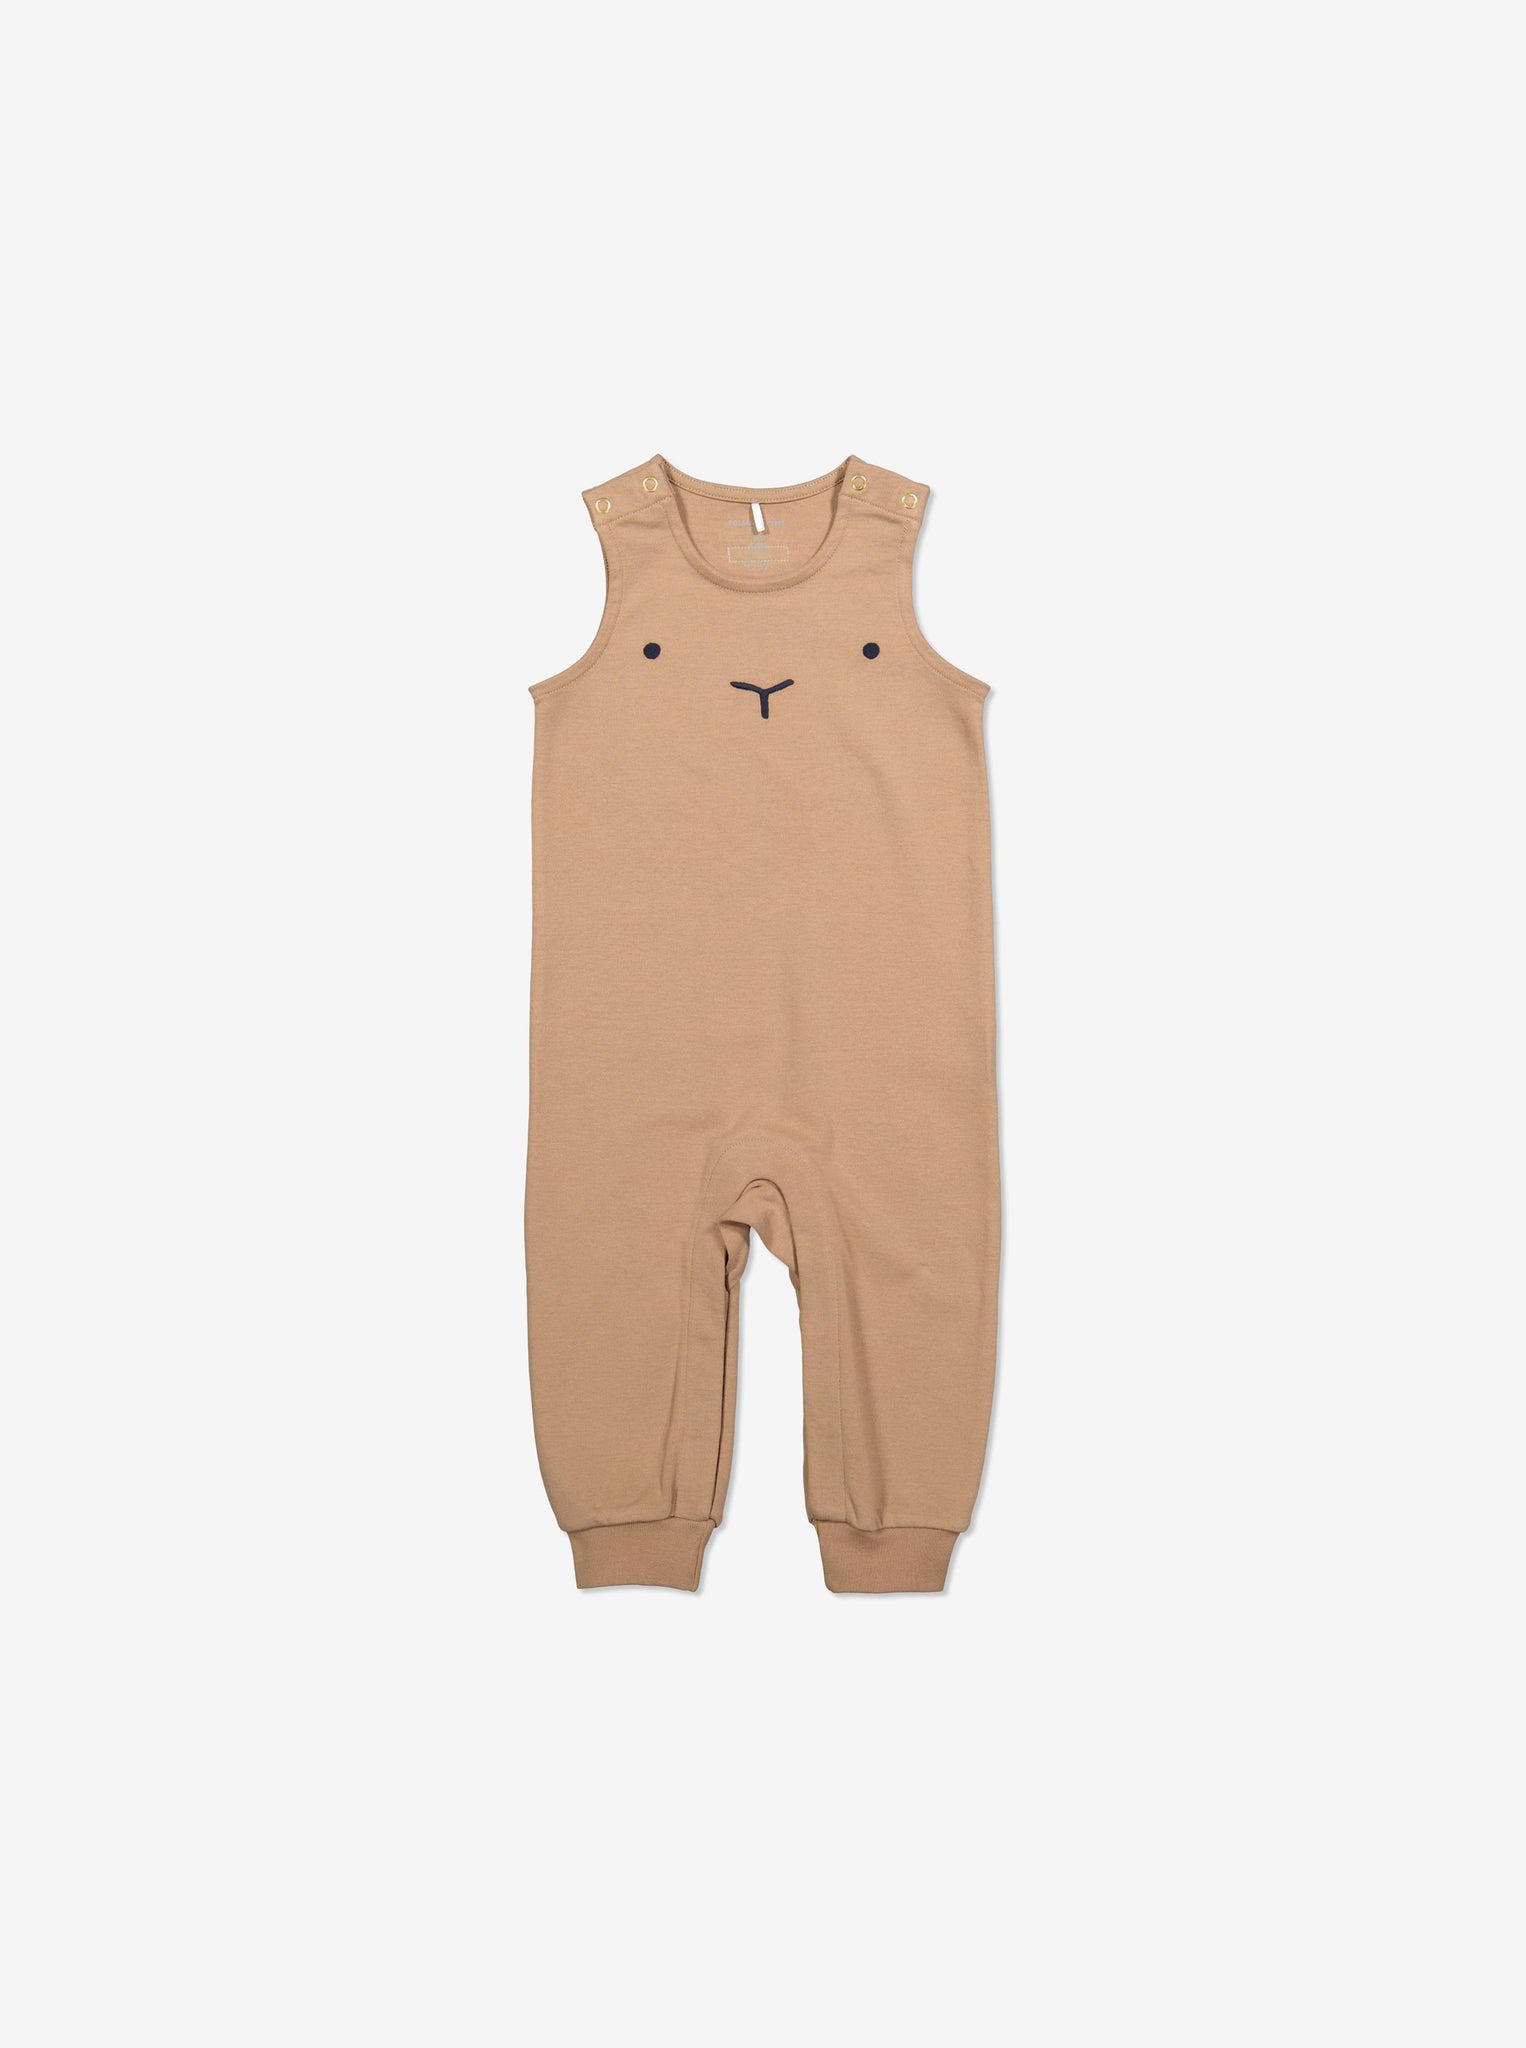  Organic Brown Baby Dungarees from Polarn O. Pyret Kidswear. Made with 100% organic cotton.